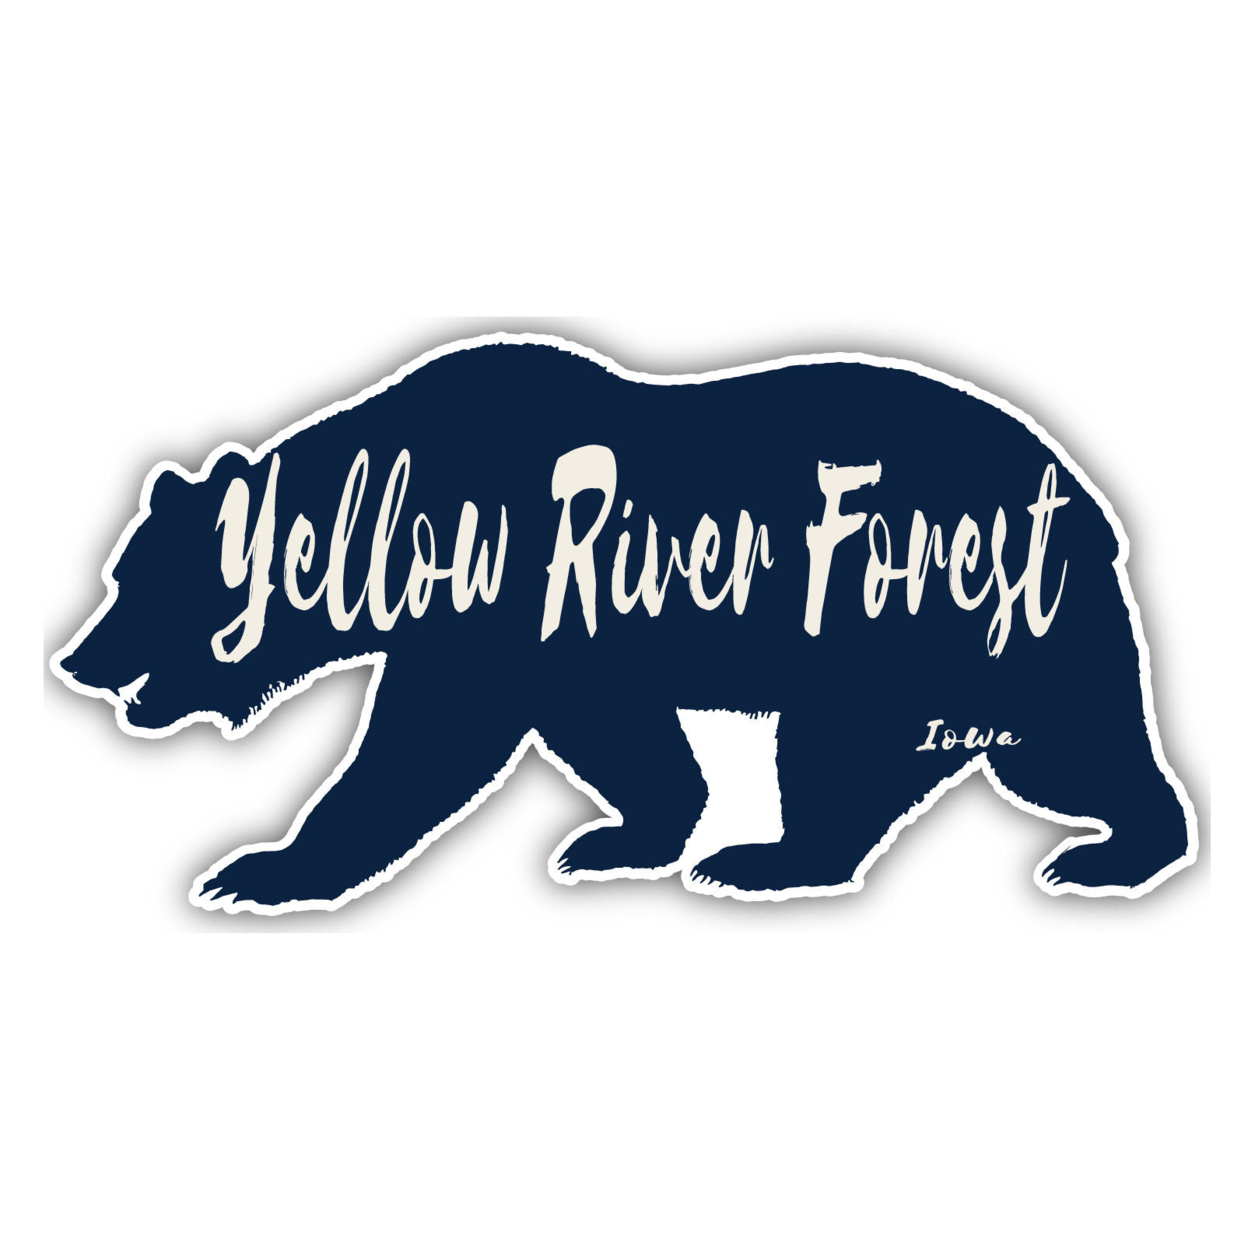 Yellow River Forest Iowa Souvenir Decorative Stickers (Choose Theme And Size) - Single Unit, 4-Inch, Bear